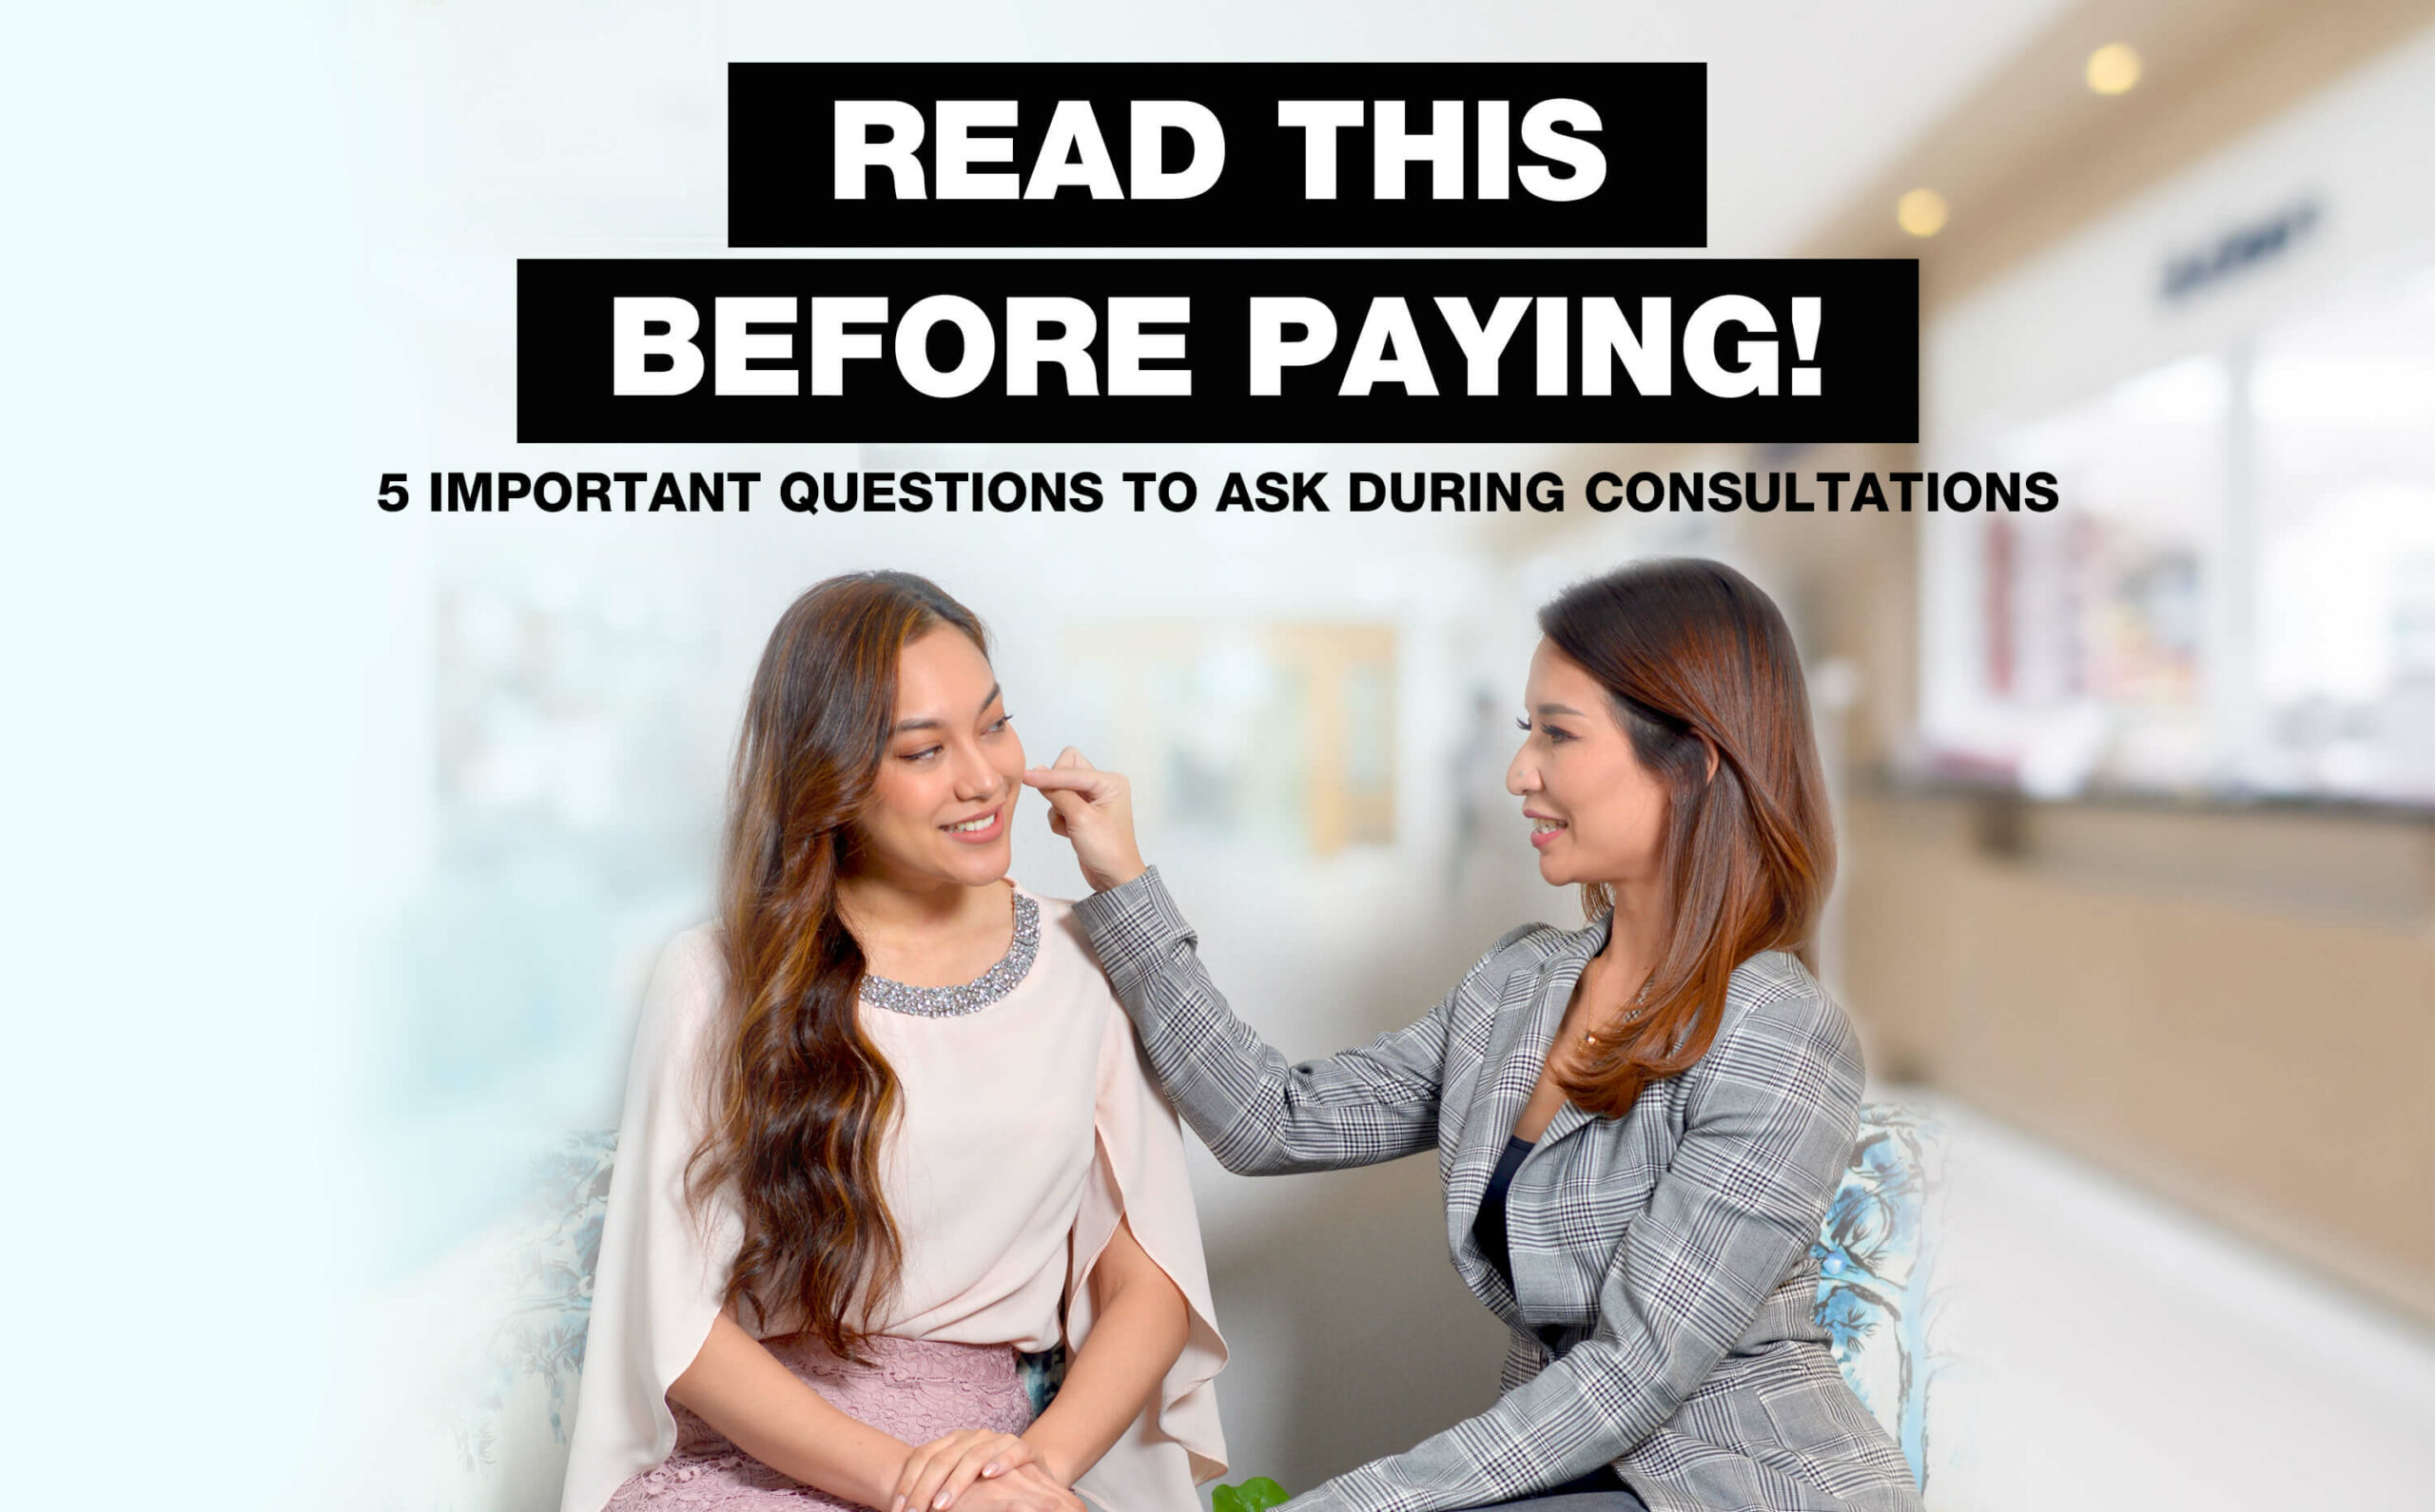 Dr Abby consulting and inspecting a patient's skin. The text 'Read this before paying! 5 important questions to ask during consultations!' is displayed.